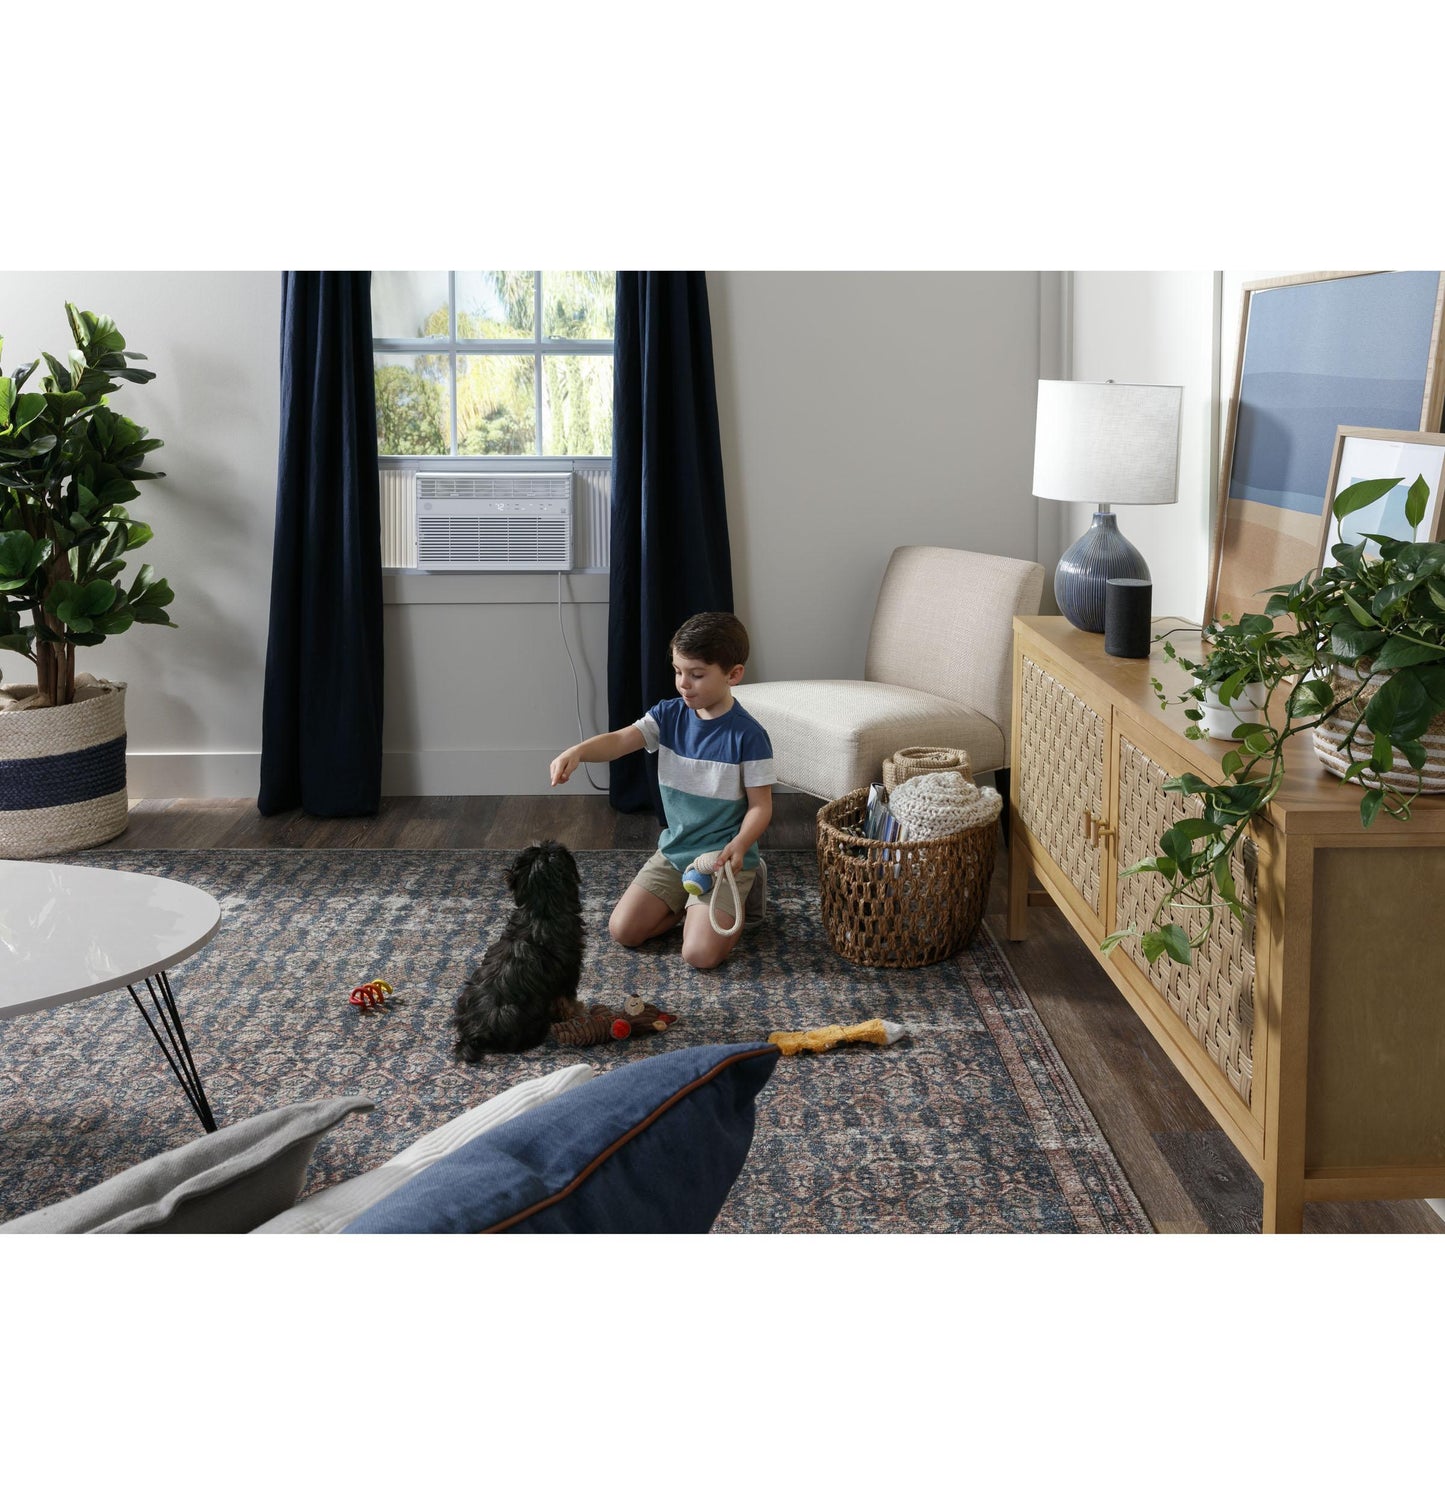 Ge Appliances AHE18DZ Ge® 18,000 Btu Heat/Cool Electronic Window Air Conditioner For Extra-Large Rooms Up To 1000 Sq. Ft.